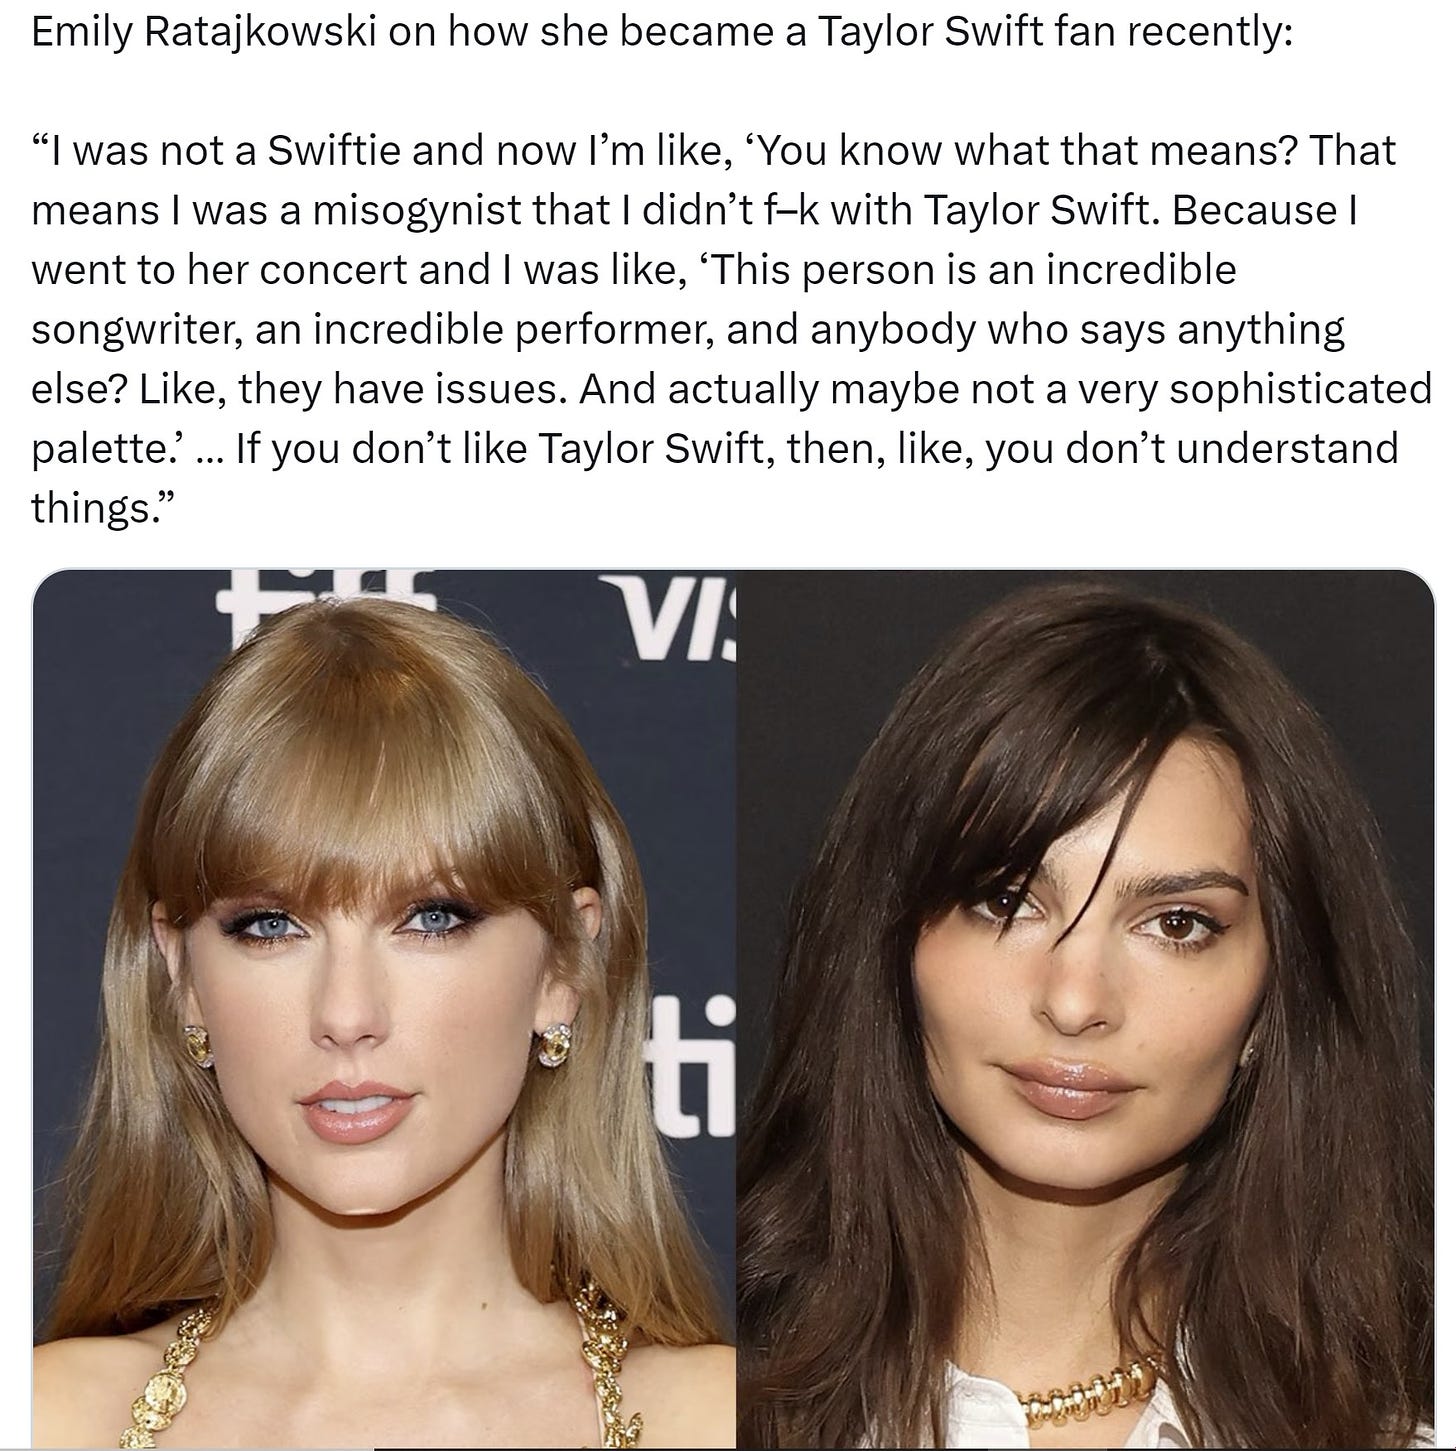 May be an image of 2 people and text that says 'Emily Ratajkowski on how she became "I was not Taylor Swift fan recently: was Swiftie and now I'm like, 'You know what that means? That means misogynist that didn't f-k with Taylor Swift. Because went to her concert and was like, 'This person is an incredible songwriter, an incredible performer, and anybody who says anything else? Like, they have issues. And actually maybe not very sophisticated palette.'.. you don't like Taylor Swift, then, like, you don't understand things." VI. ti'